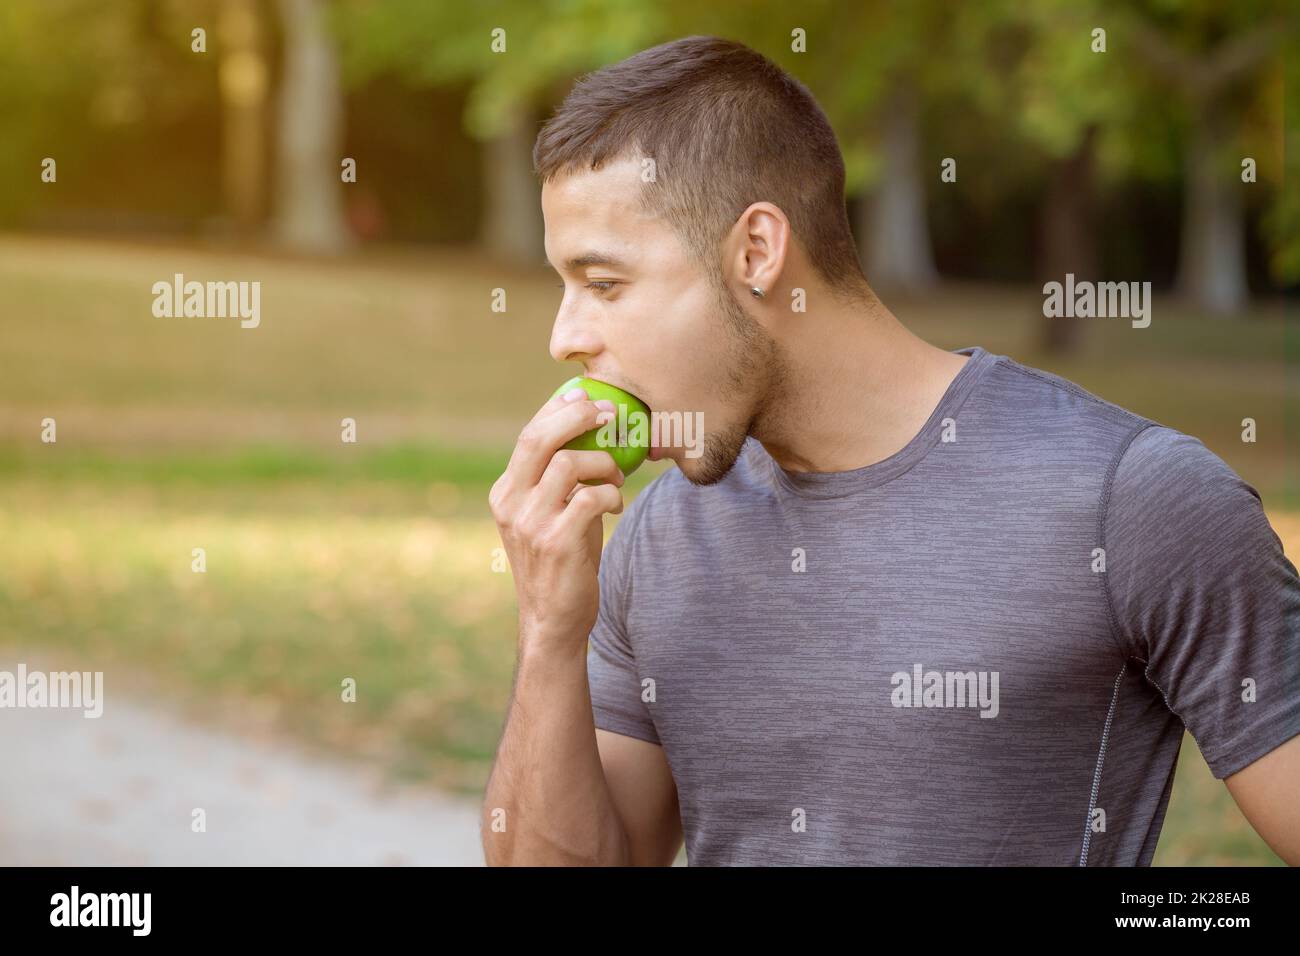 Young man eating apple in a park copyspace copy space runner sports training Stock Photo